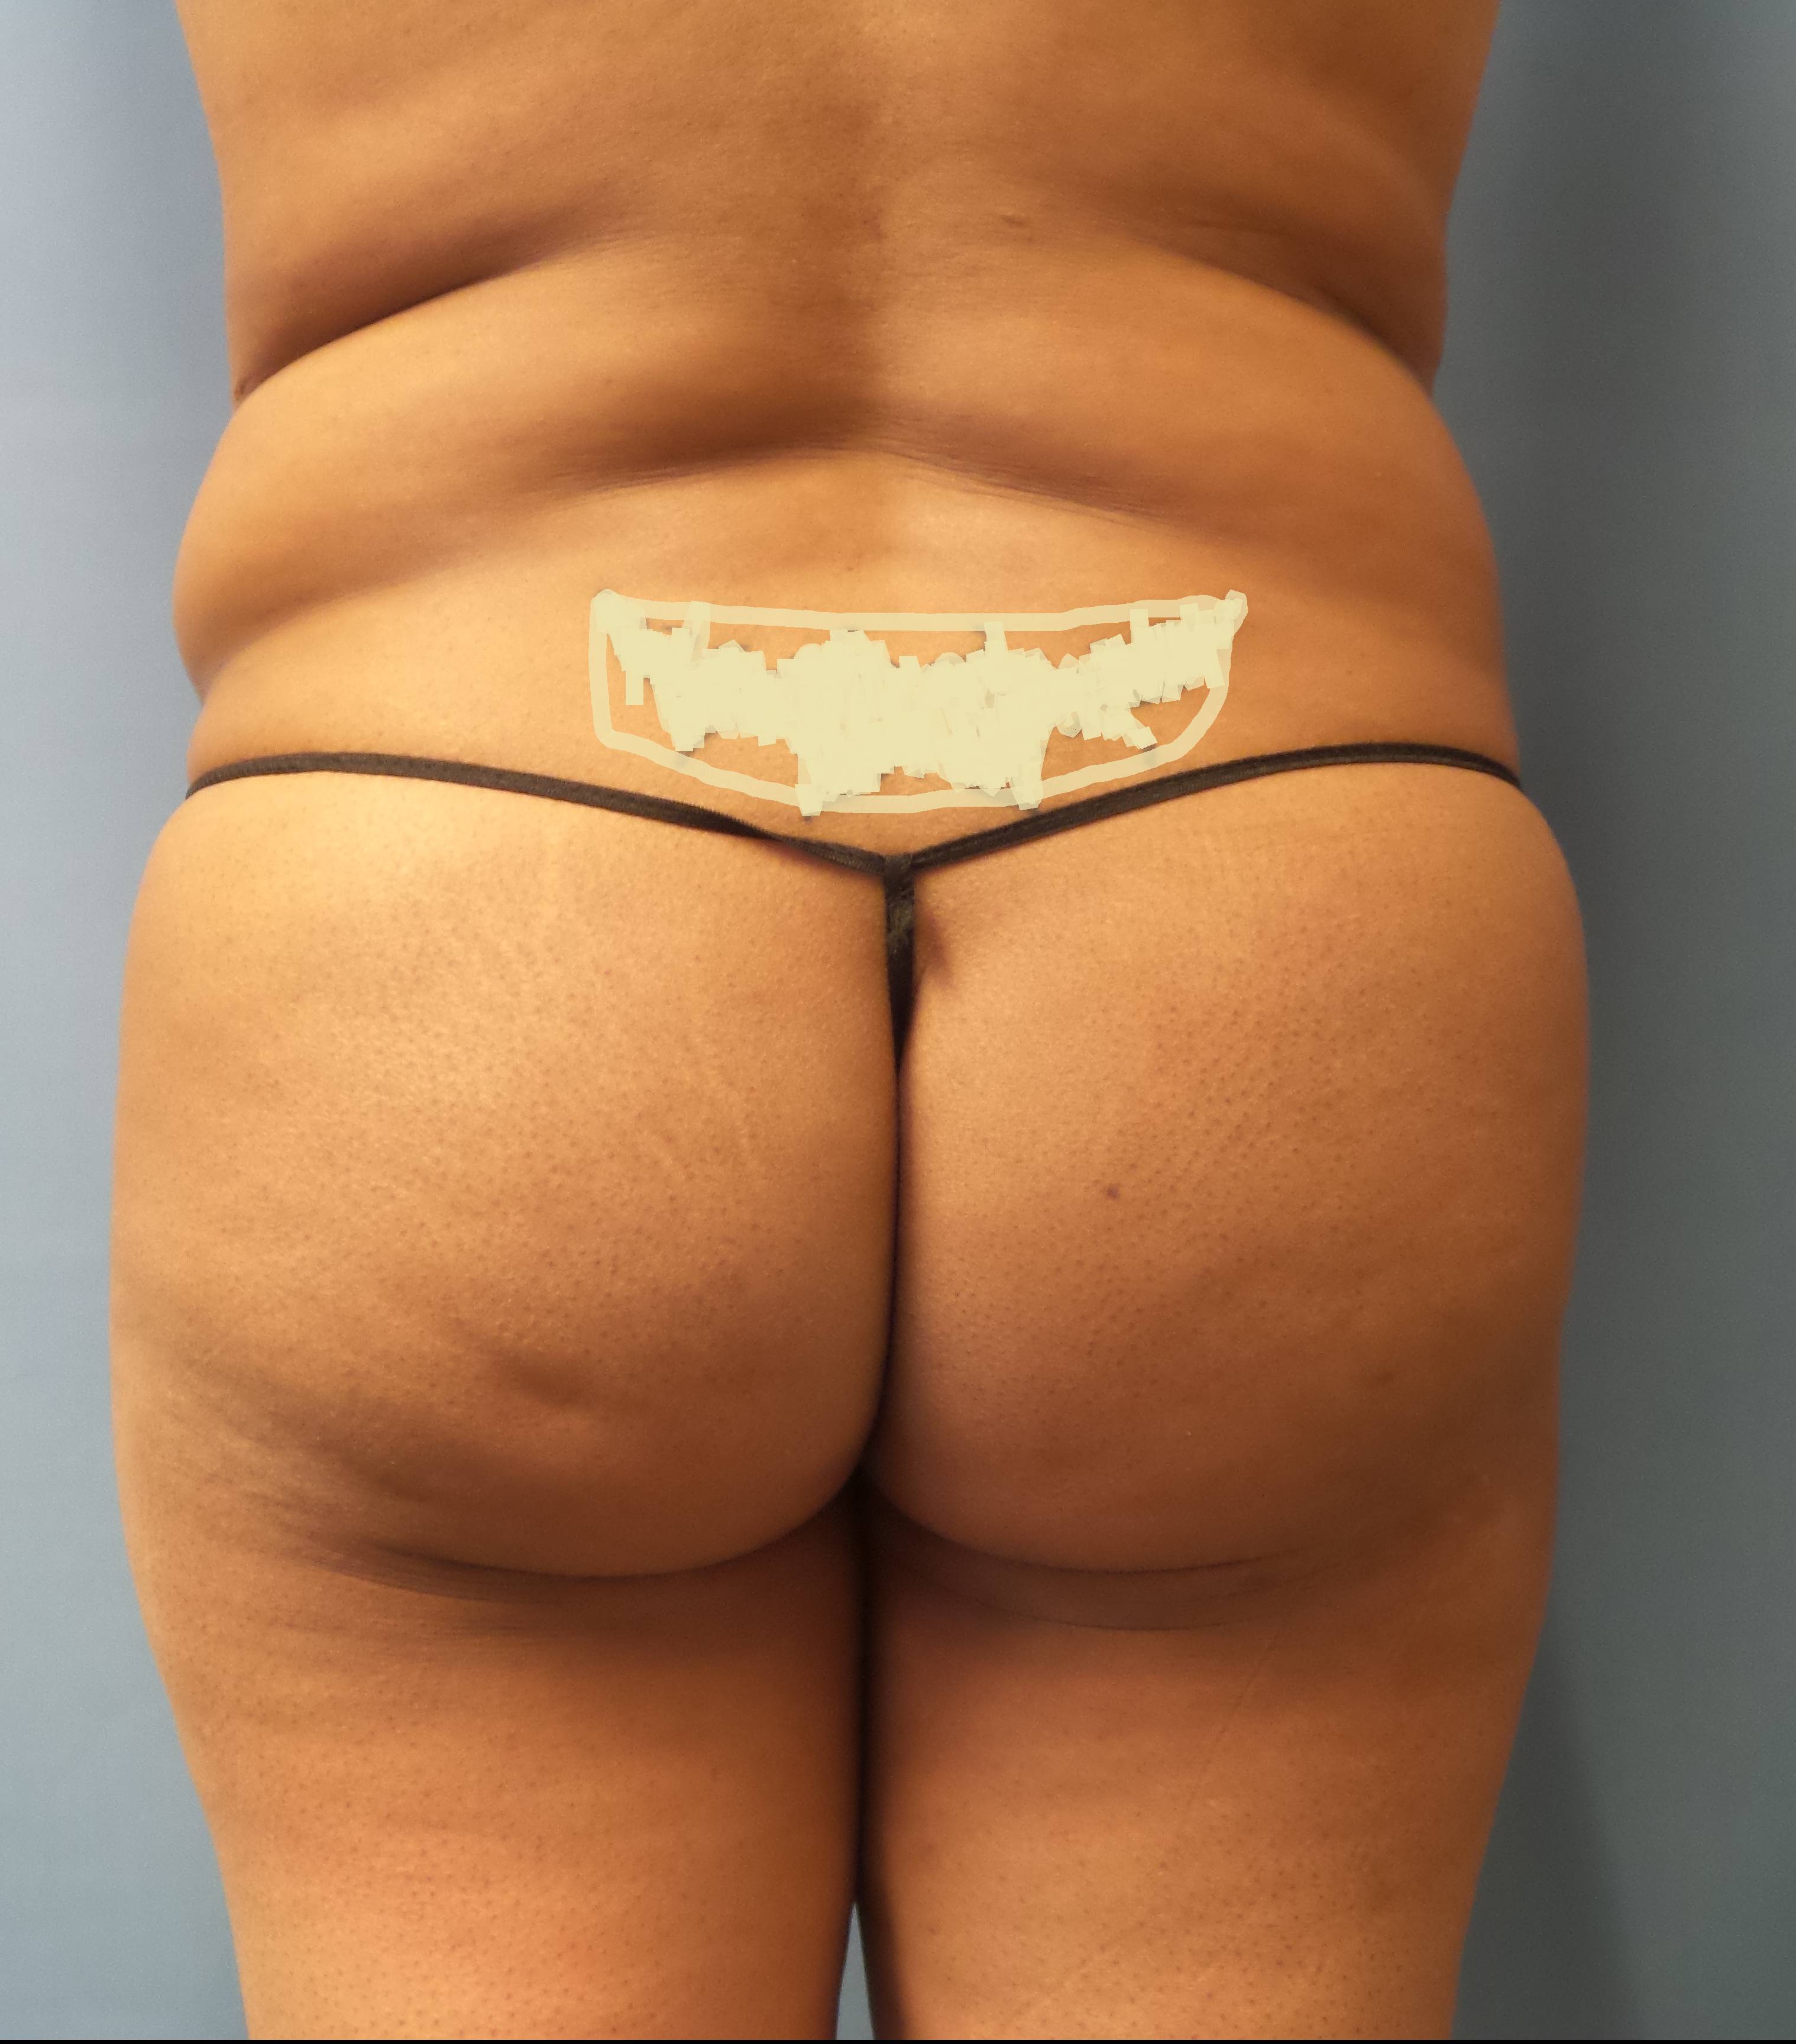 Large Volume BBL Fat Transfer and Body Contouring, NJ